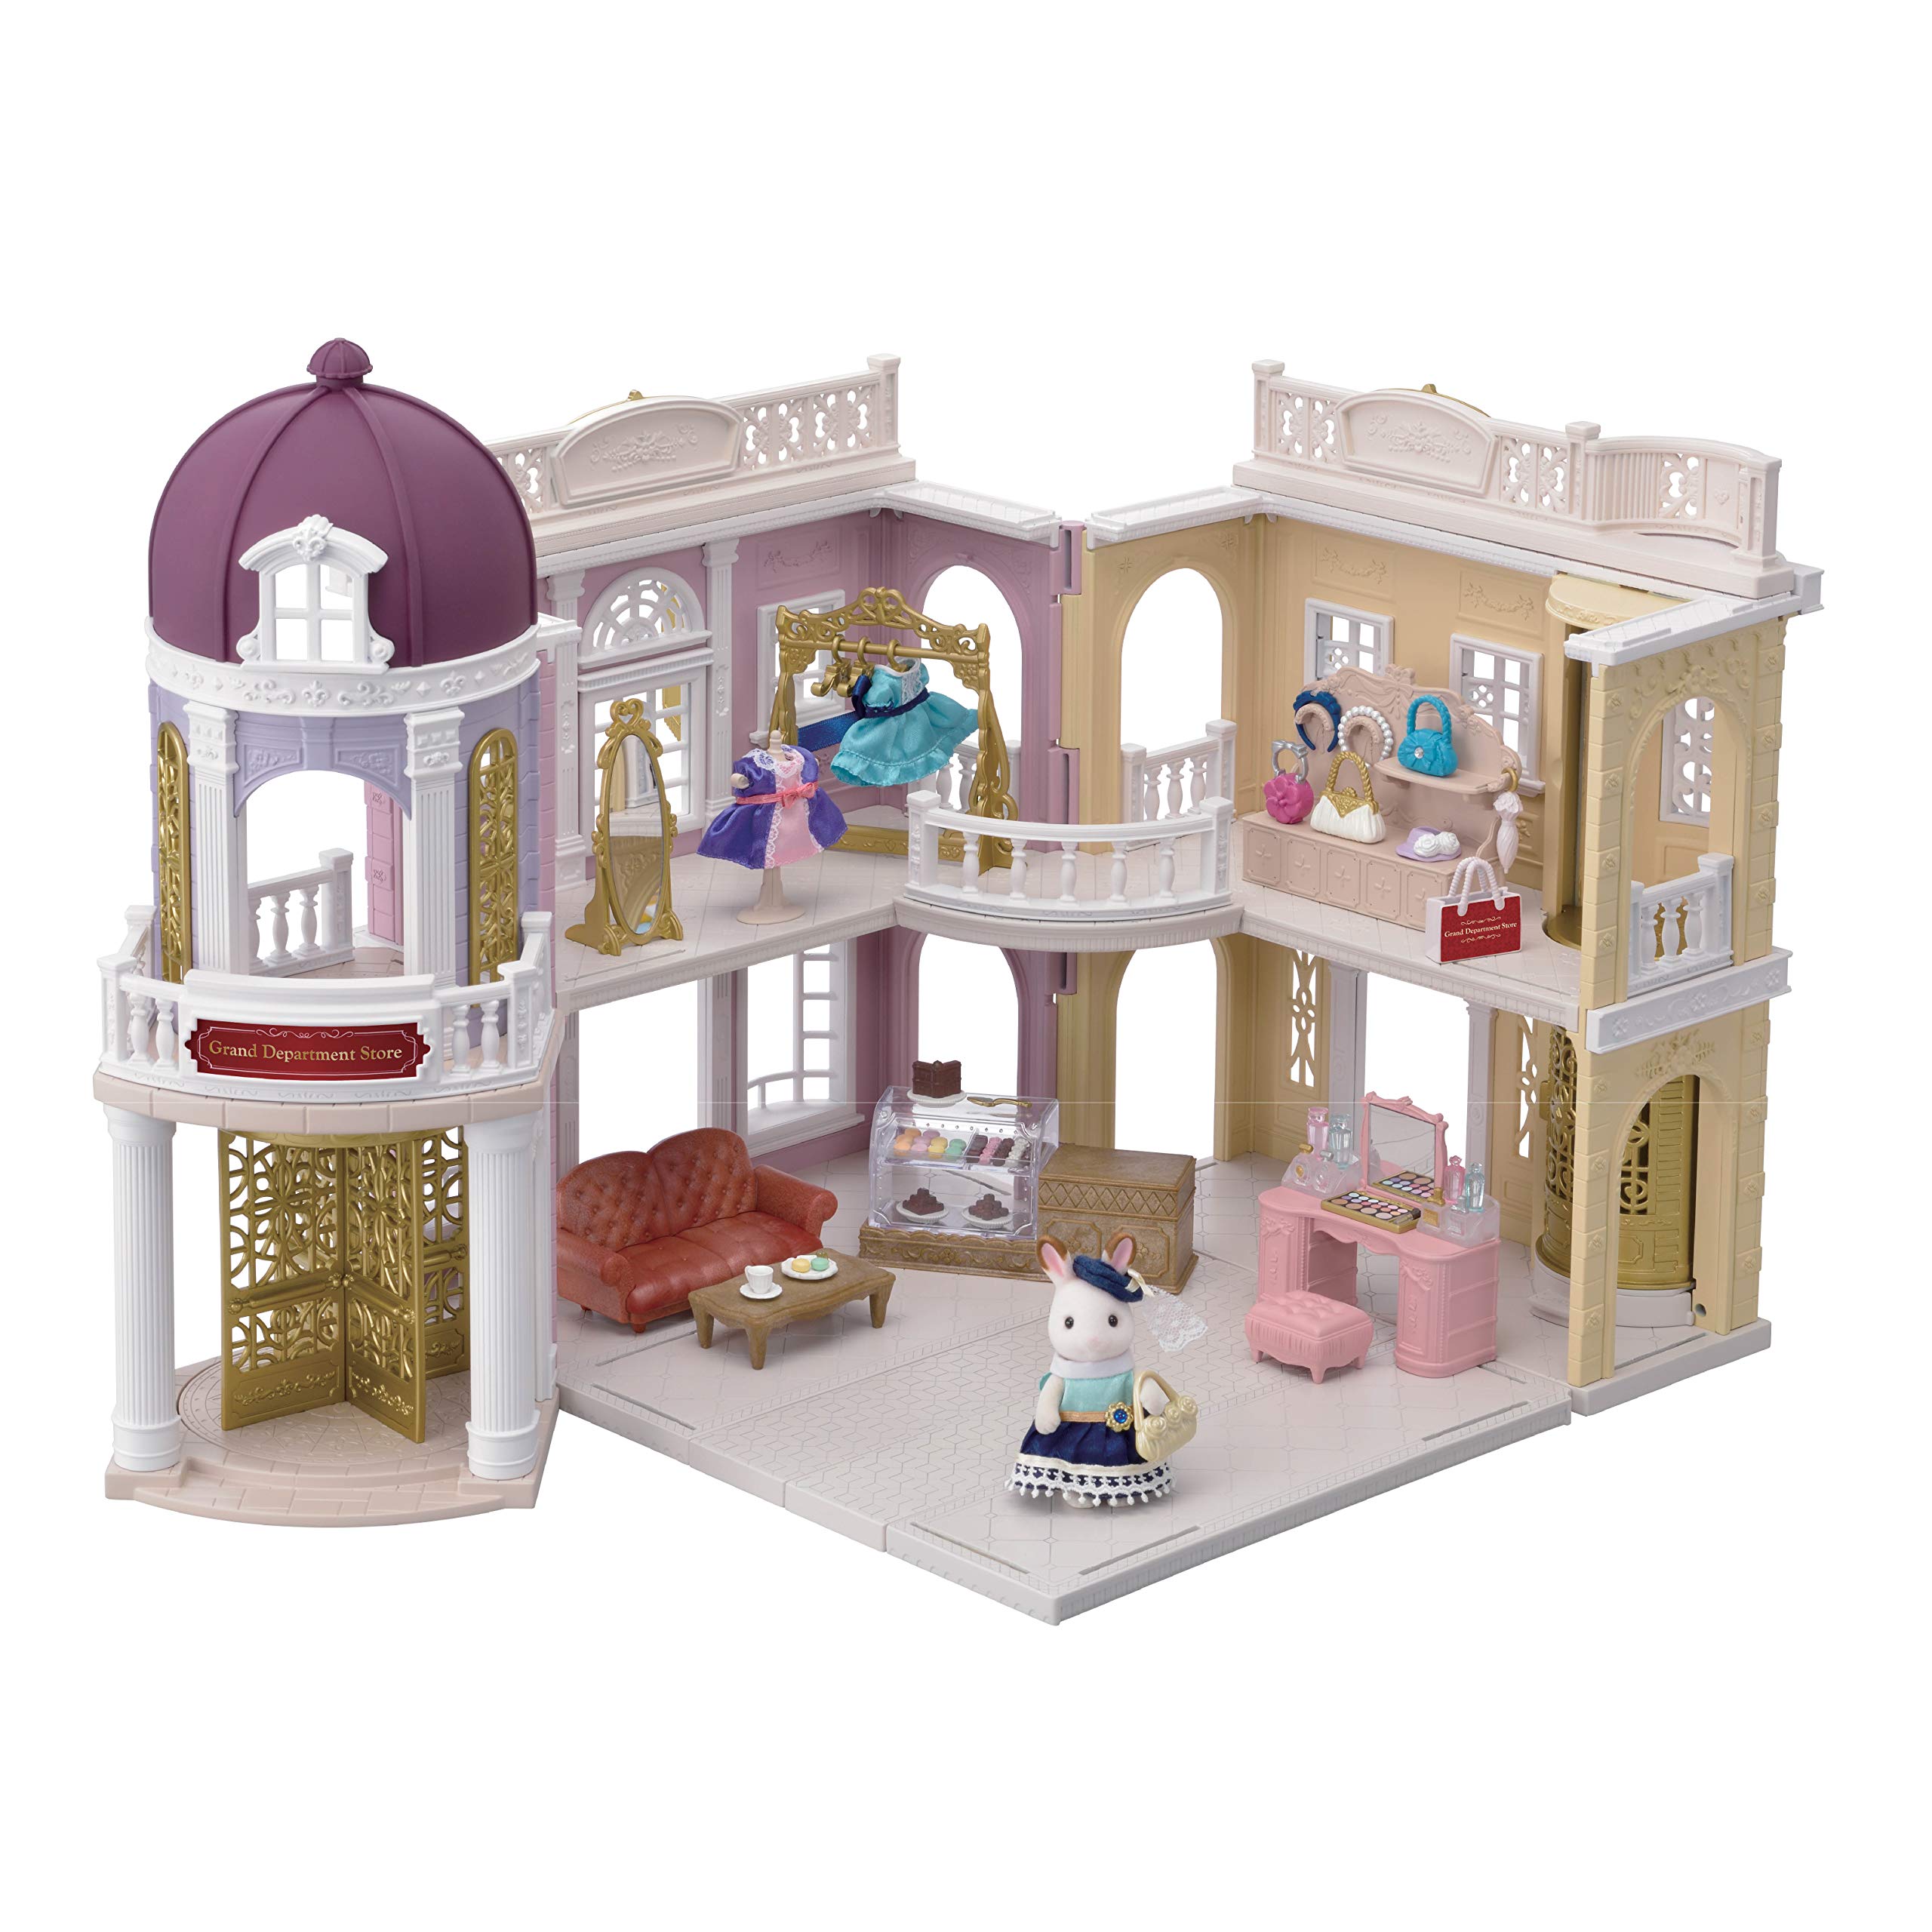 Calico Critters Town Series Grand Department Store Gift Set, 3 - 8 years, Fashion Dollhouse Playset, Figure, Furniture and Accessories Included